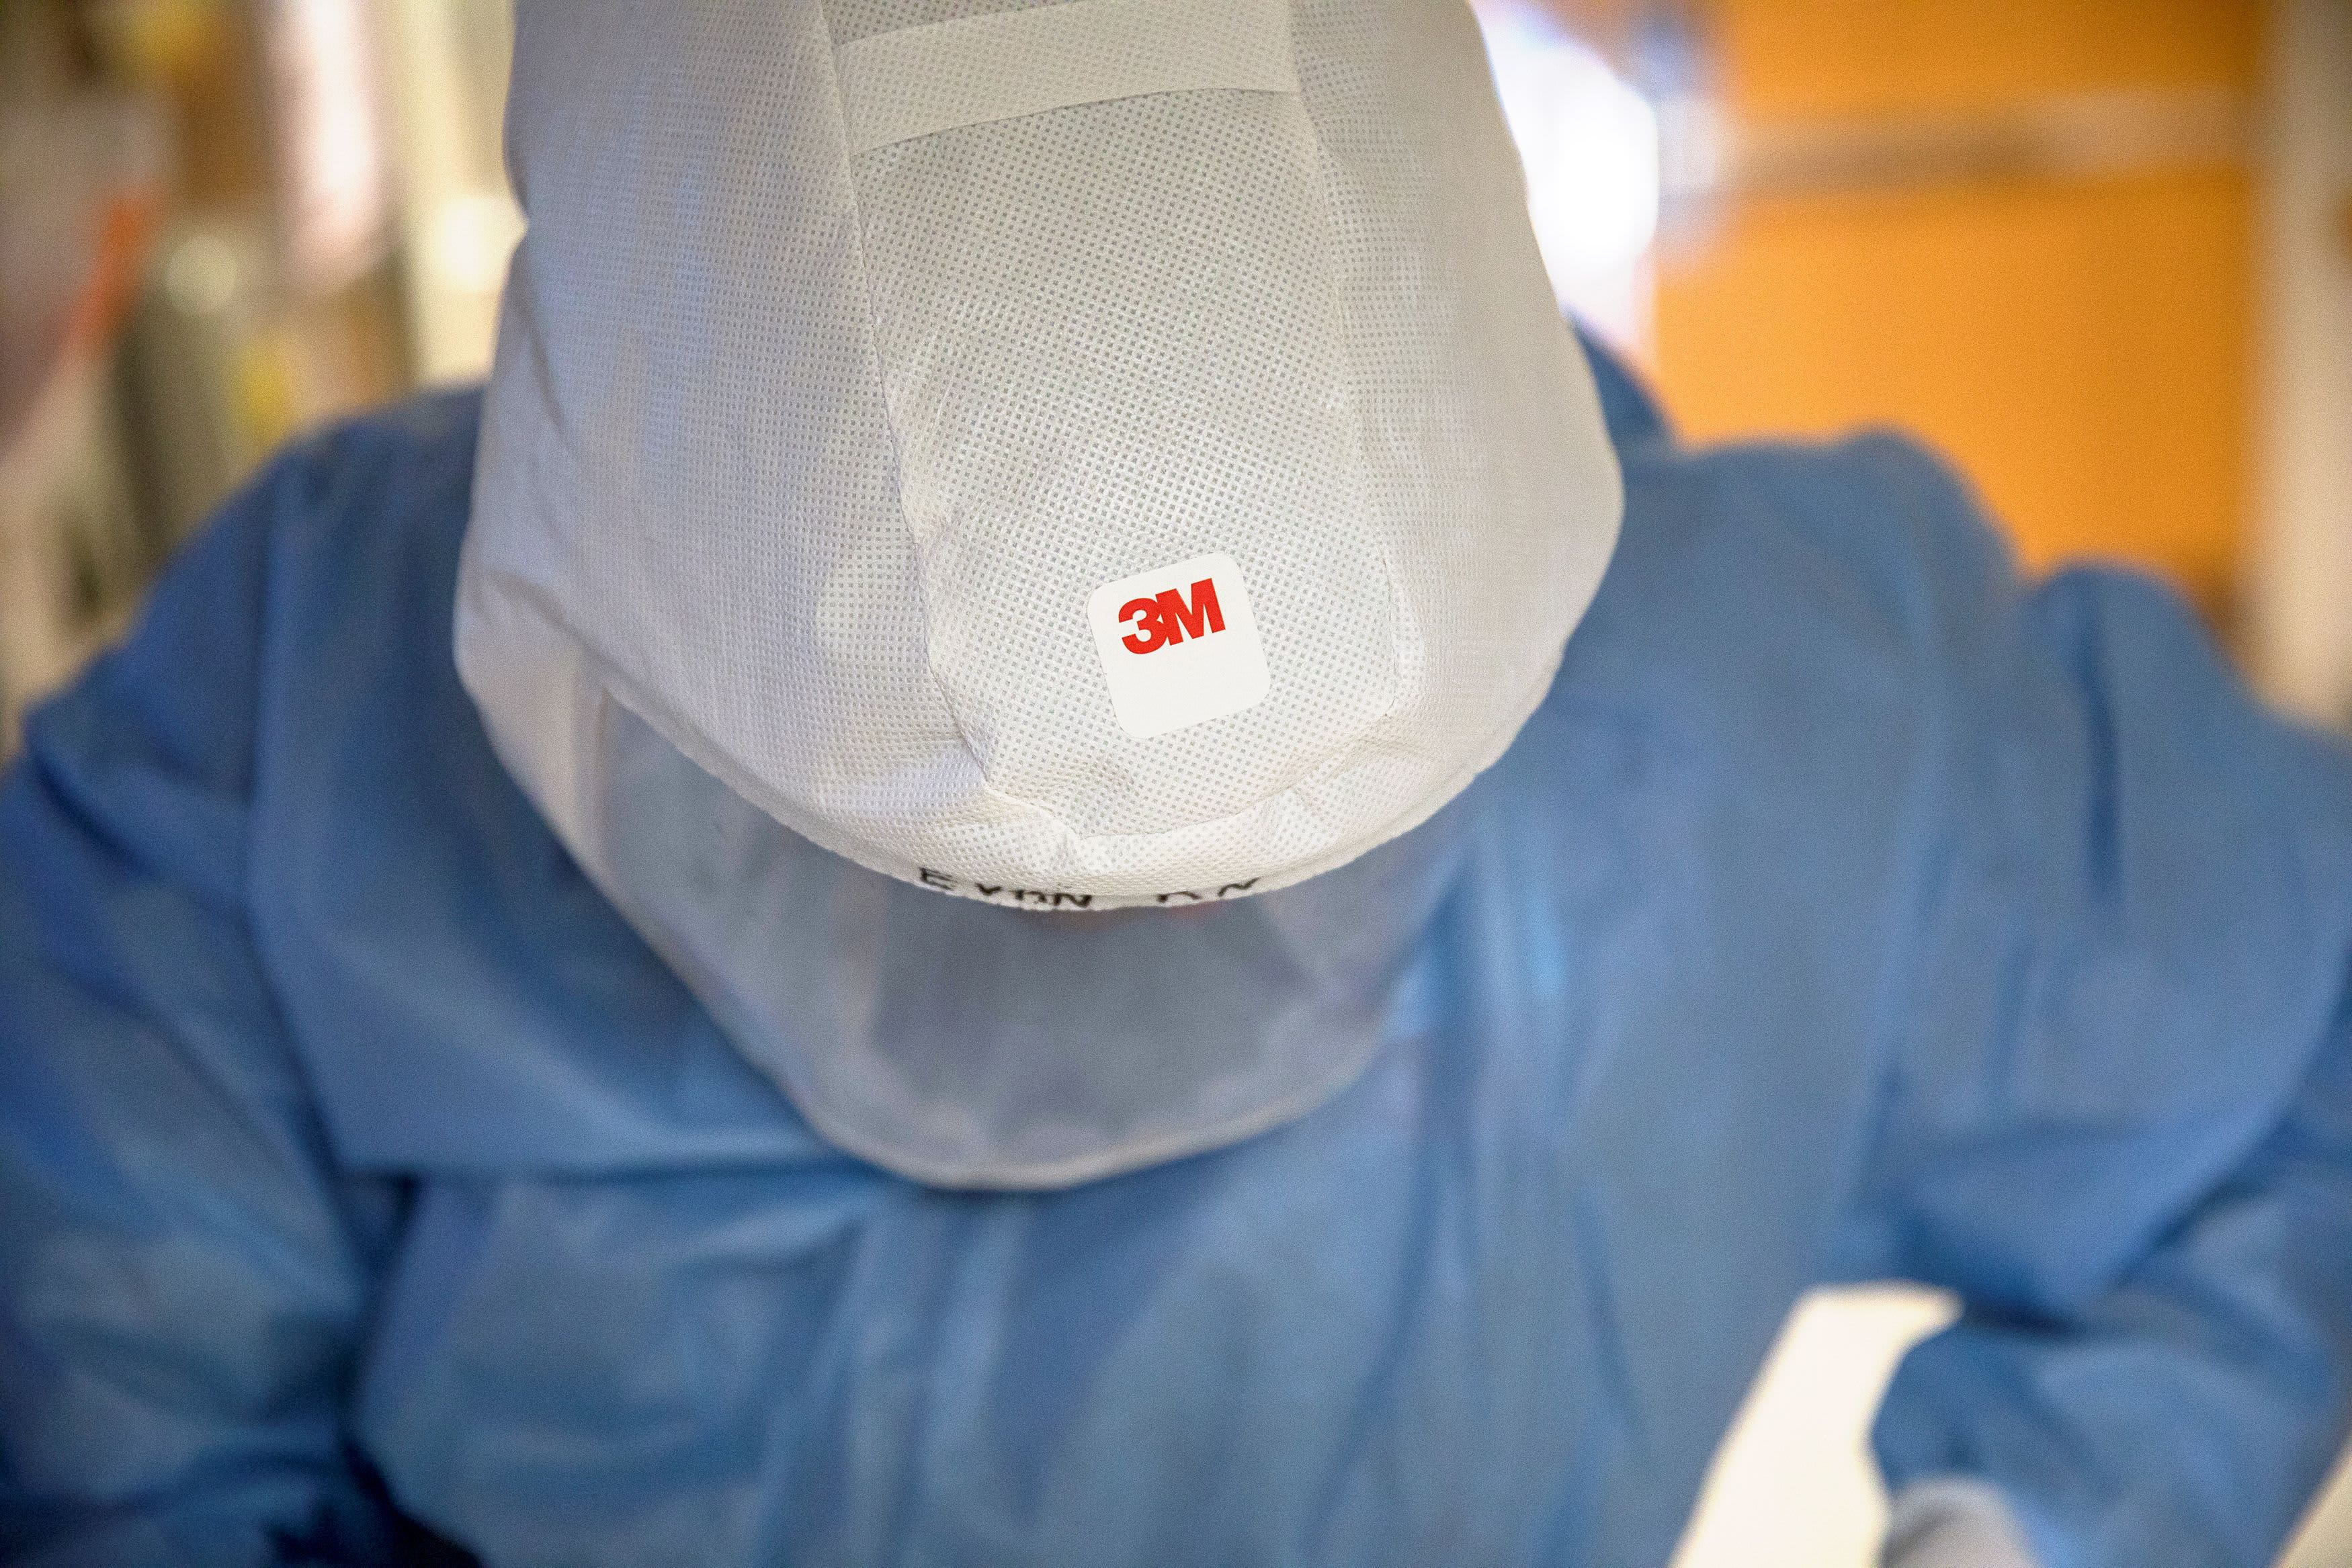 3M will spin off its health-care business into a new public company